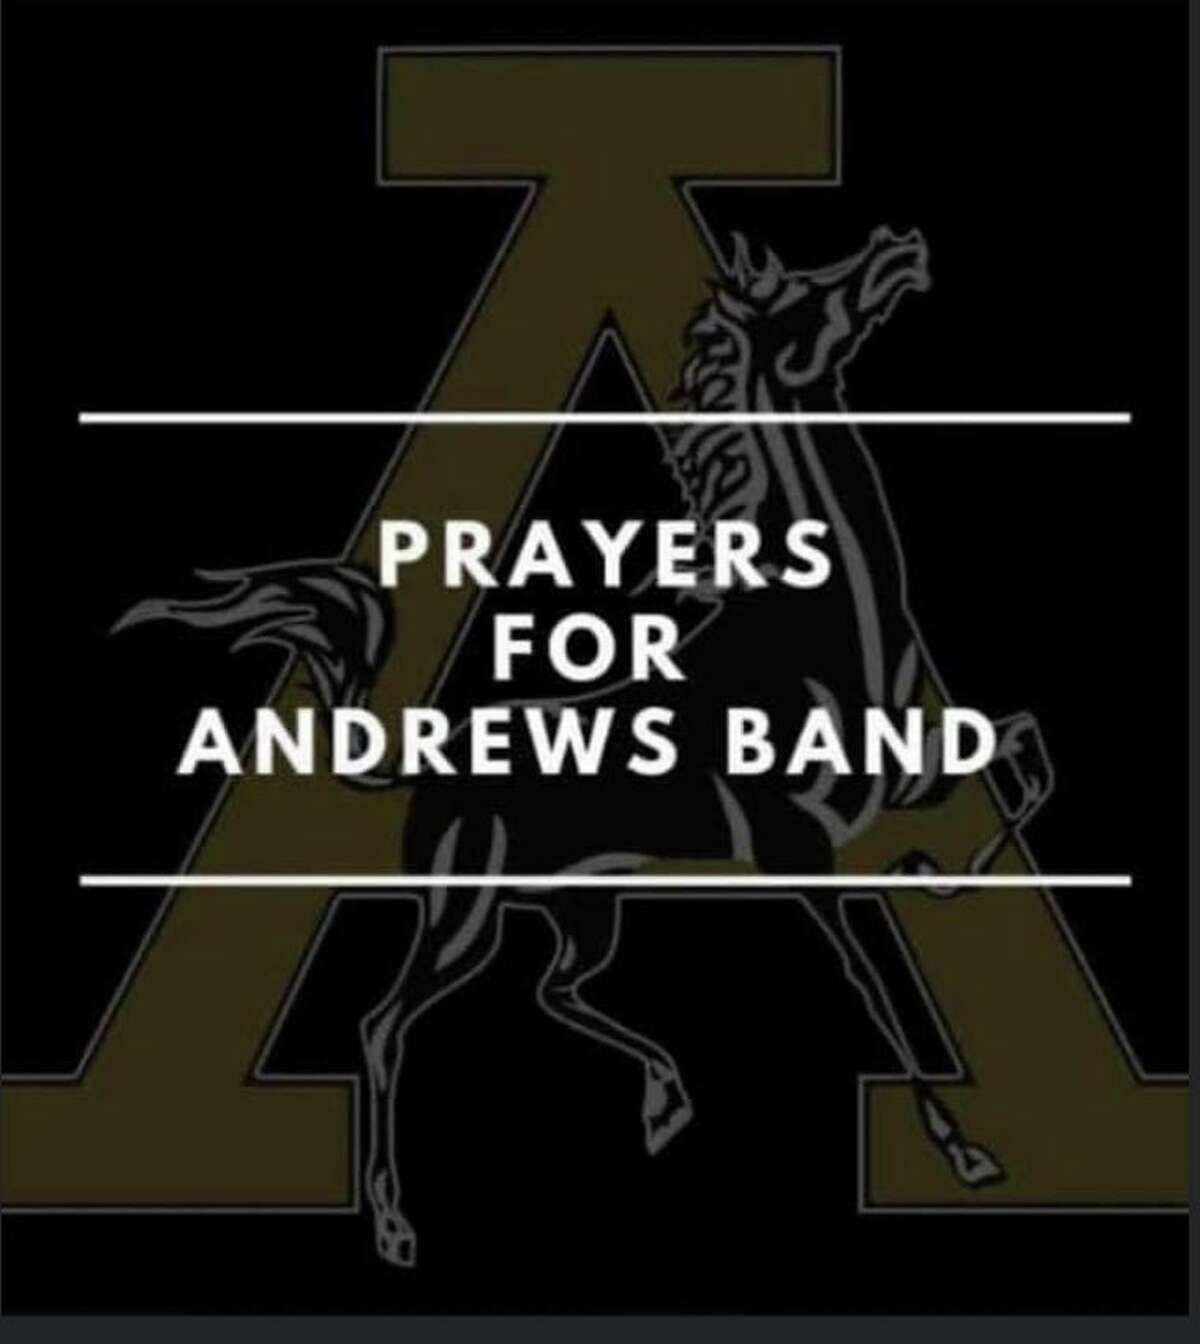 A "Pray for Andrews Band" is being shared throughout social media to show support for the Andrews ISD school band.  